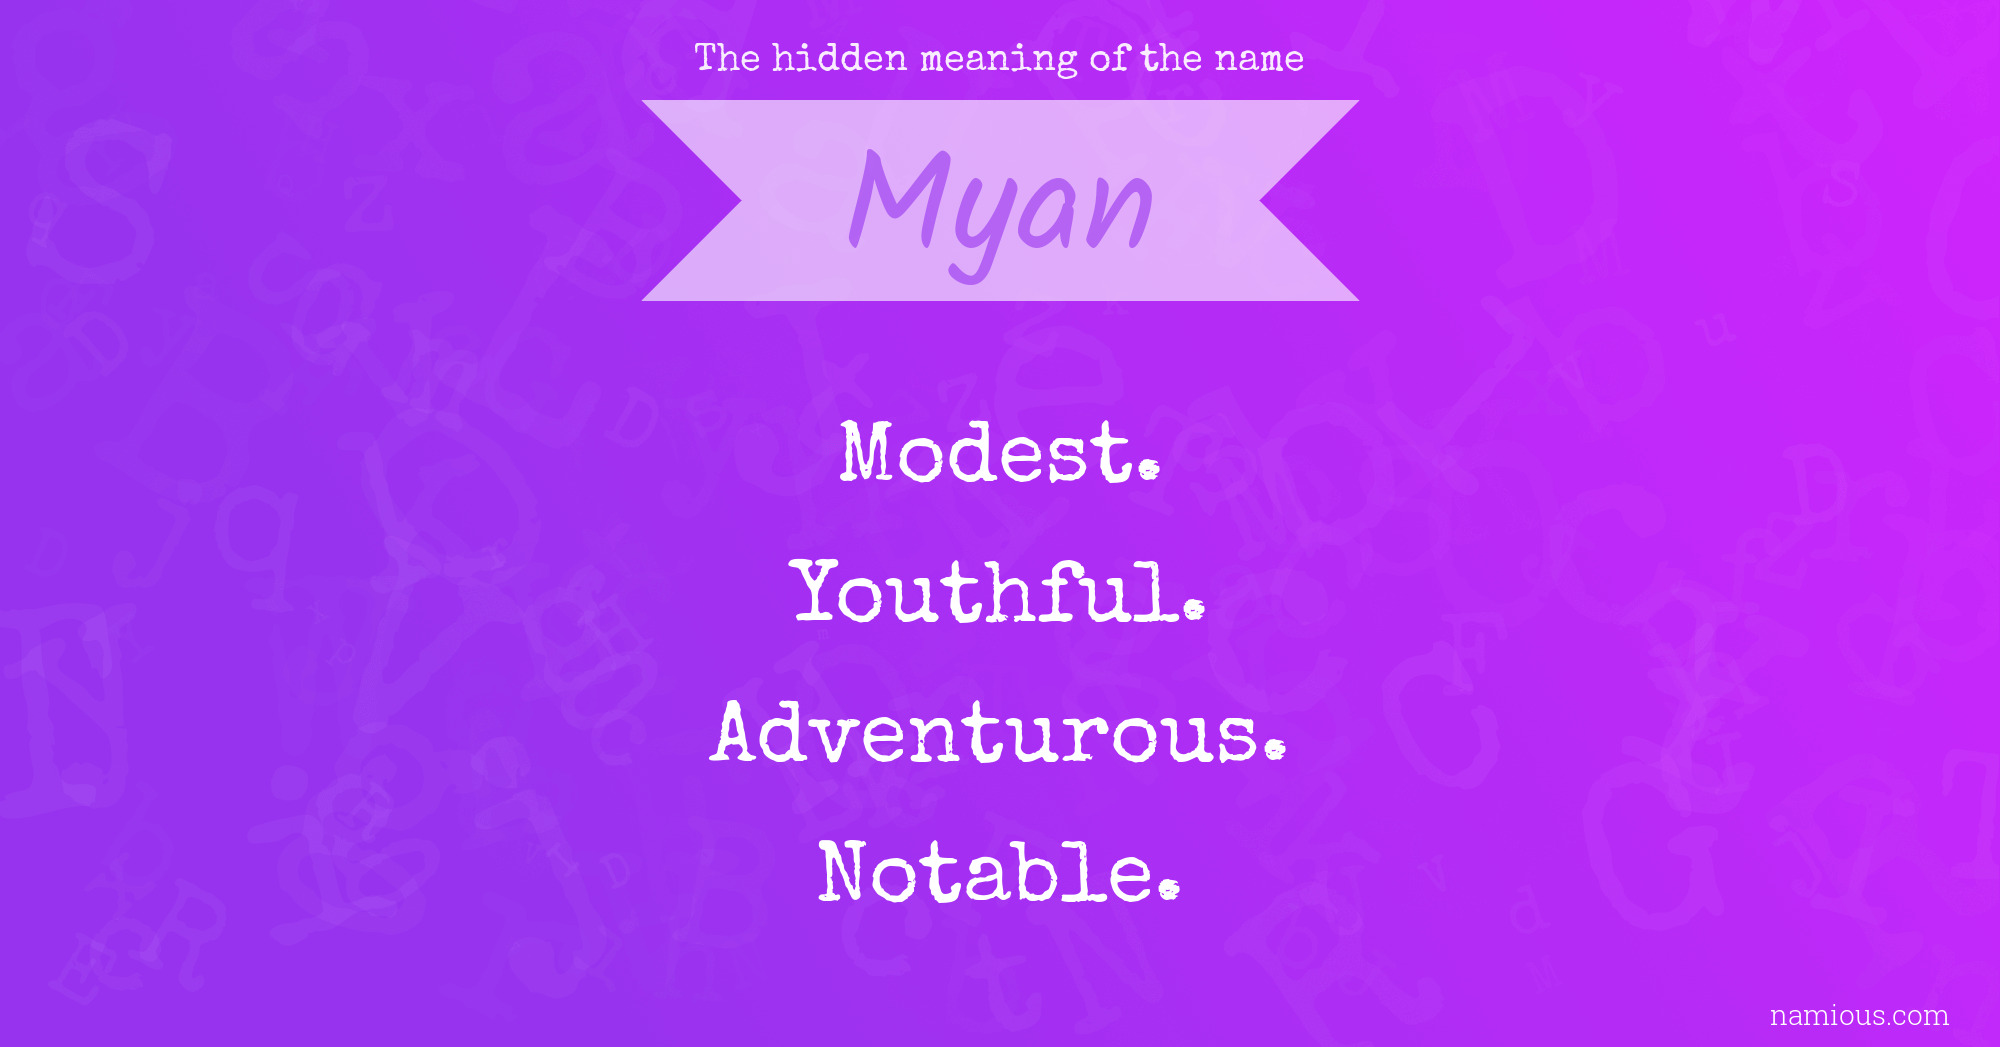 The hidden meaning of the name Myan